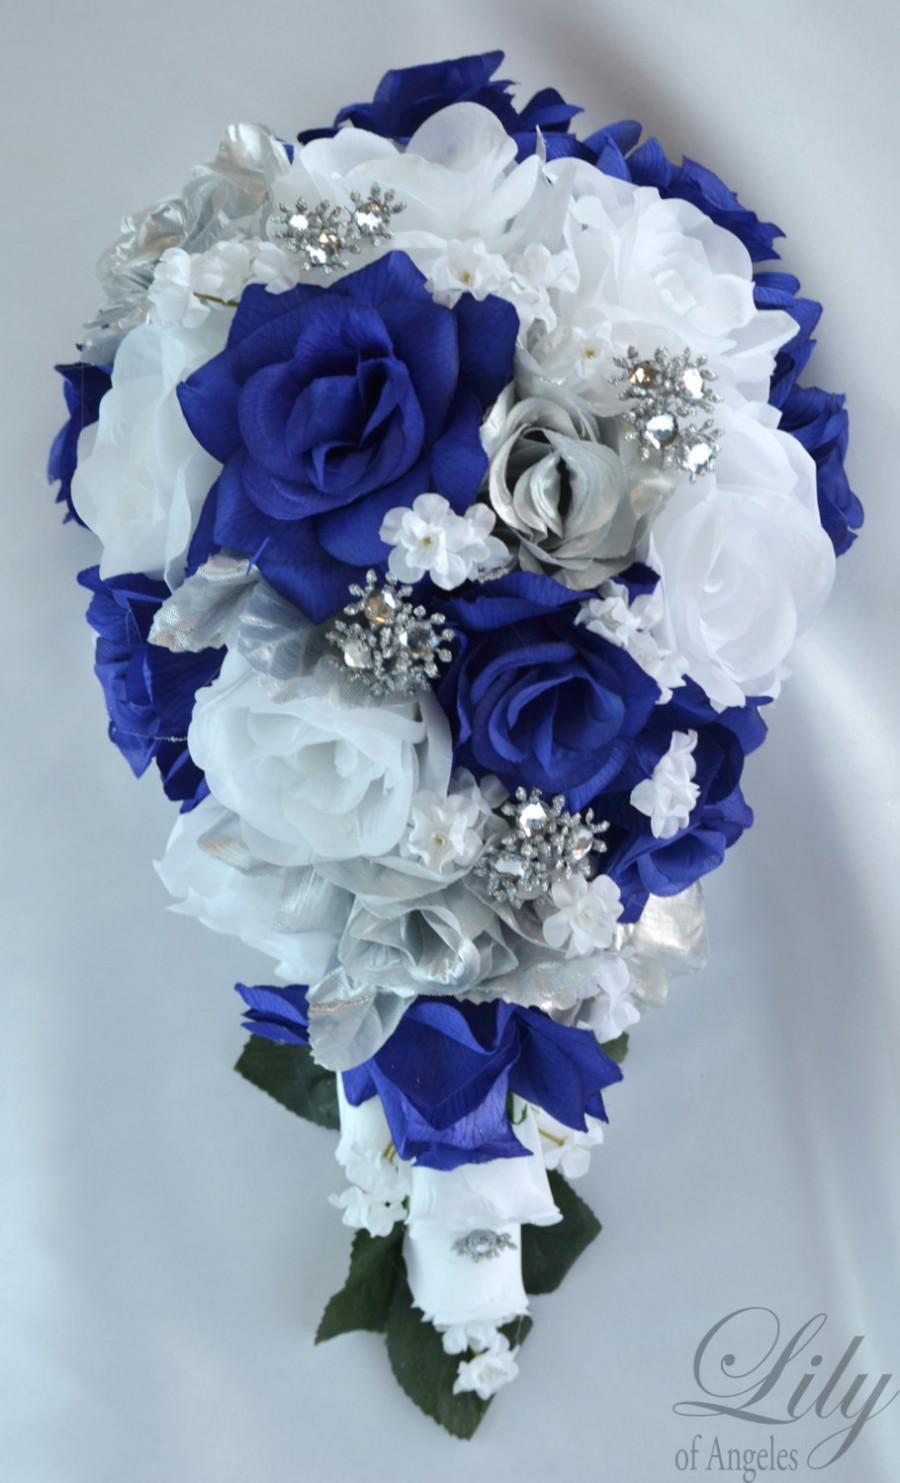 Mariage - 17 Piece Package Wedding Cascade Bouquet Bride Silk Flowers Bridal Bouquets Decorations Teardrop Navy BLUE SILVER "Lily of Angeles" BLSI01